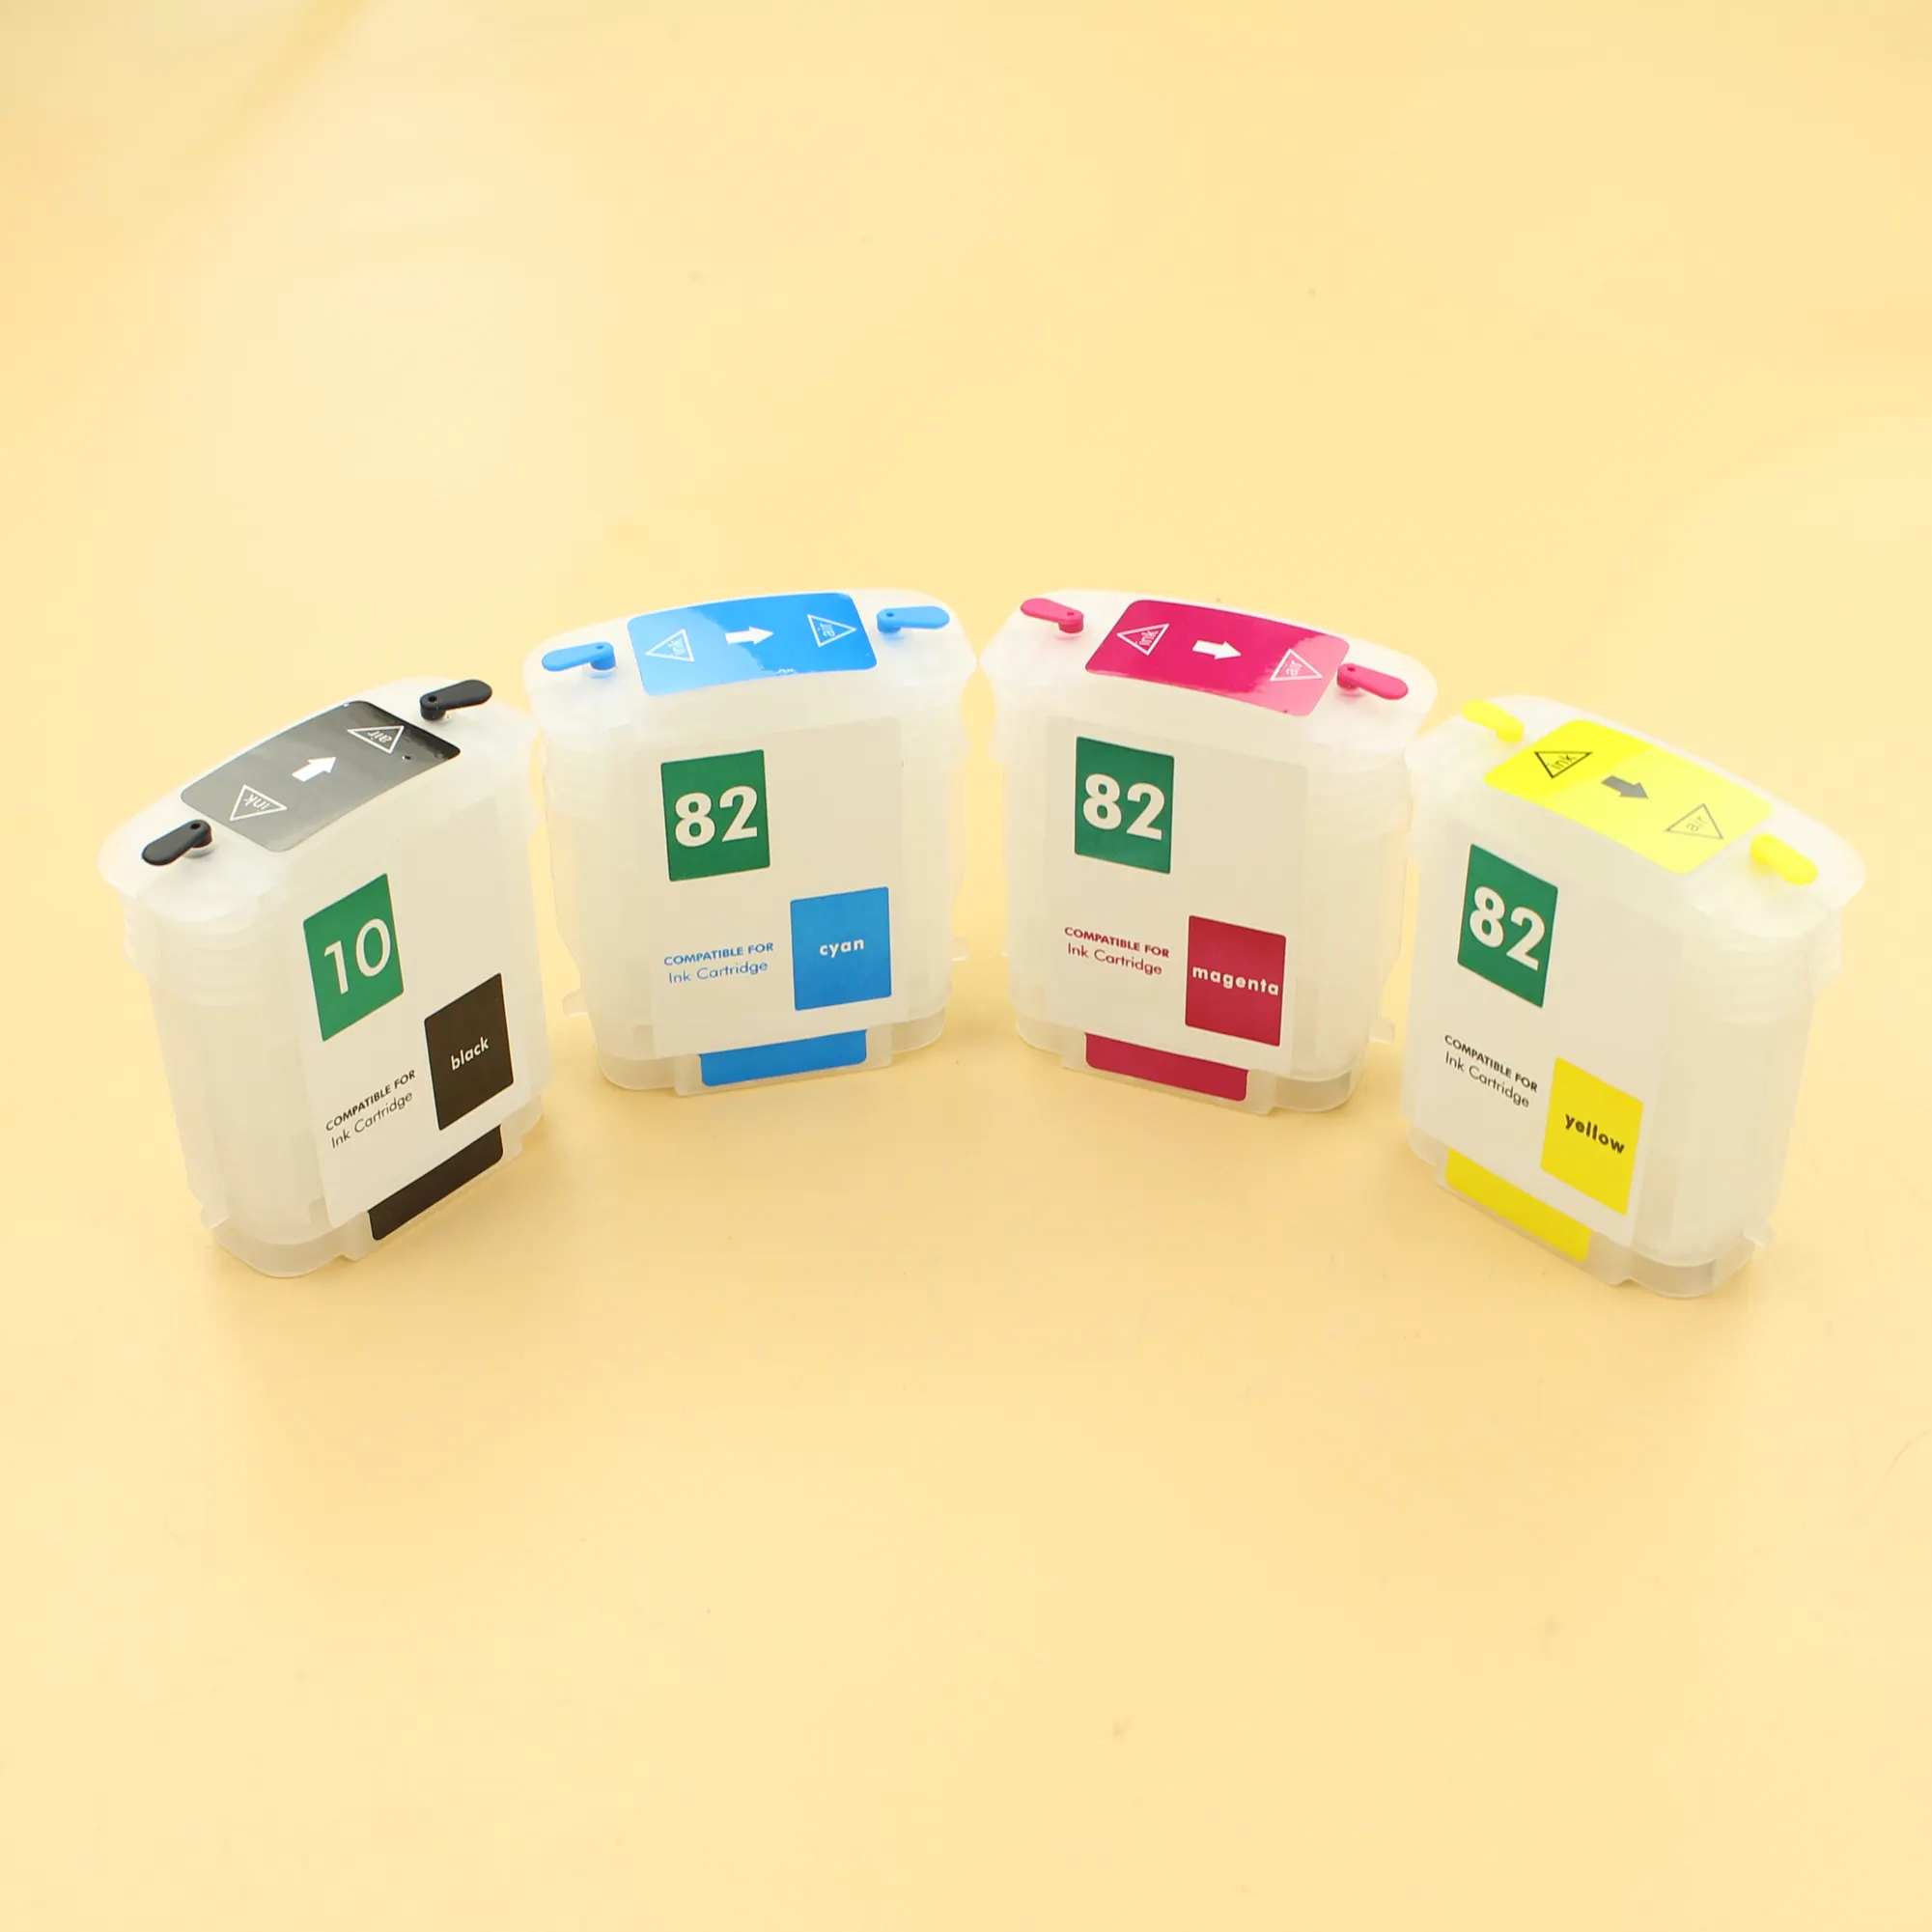 69ML Refillable Ink Cartridge for HP 10 82 For HP DesignJet 500 500ps 800 800ps 815MFP 820MFP Printer 4Color